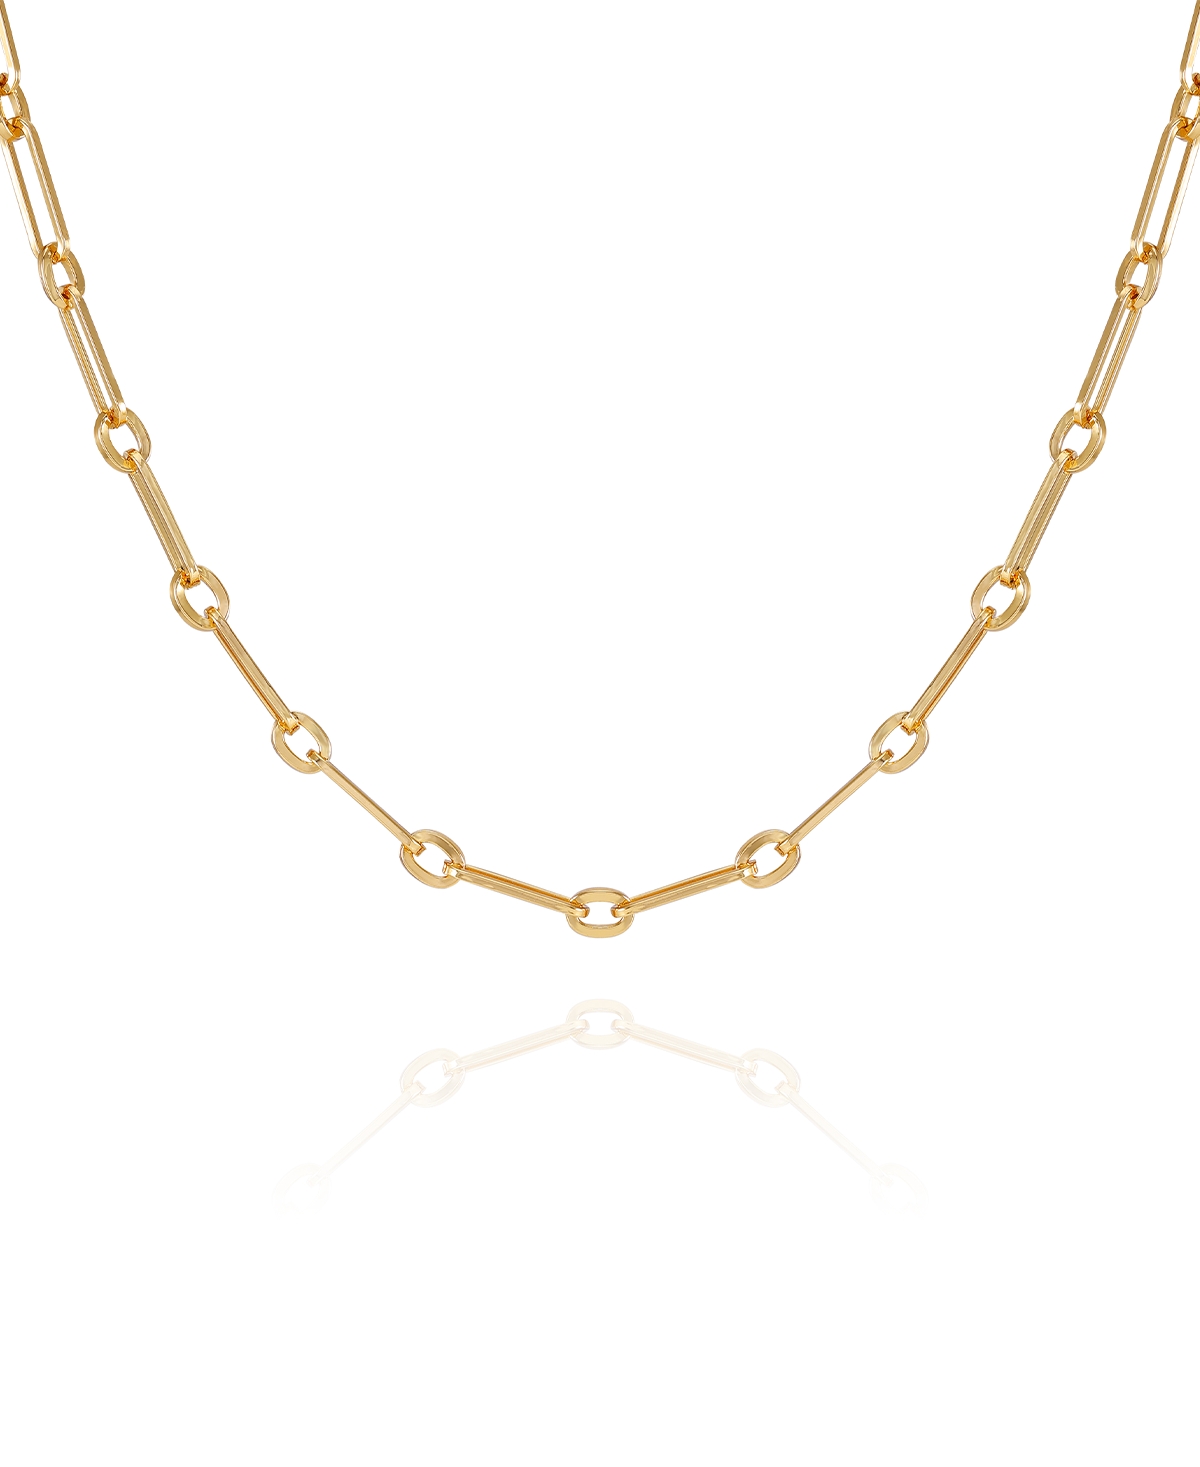 Vince Camuto Gold-tone Link Chain Necklace